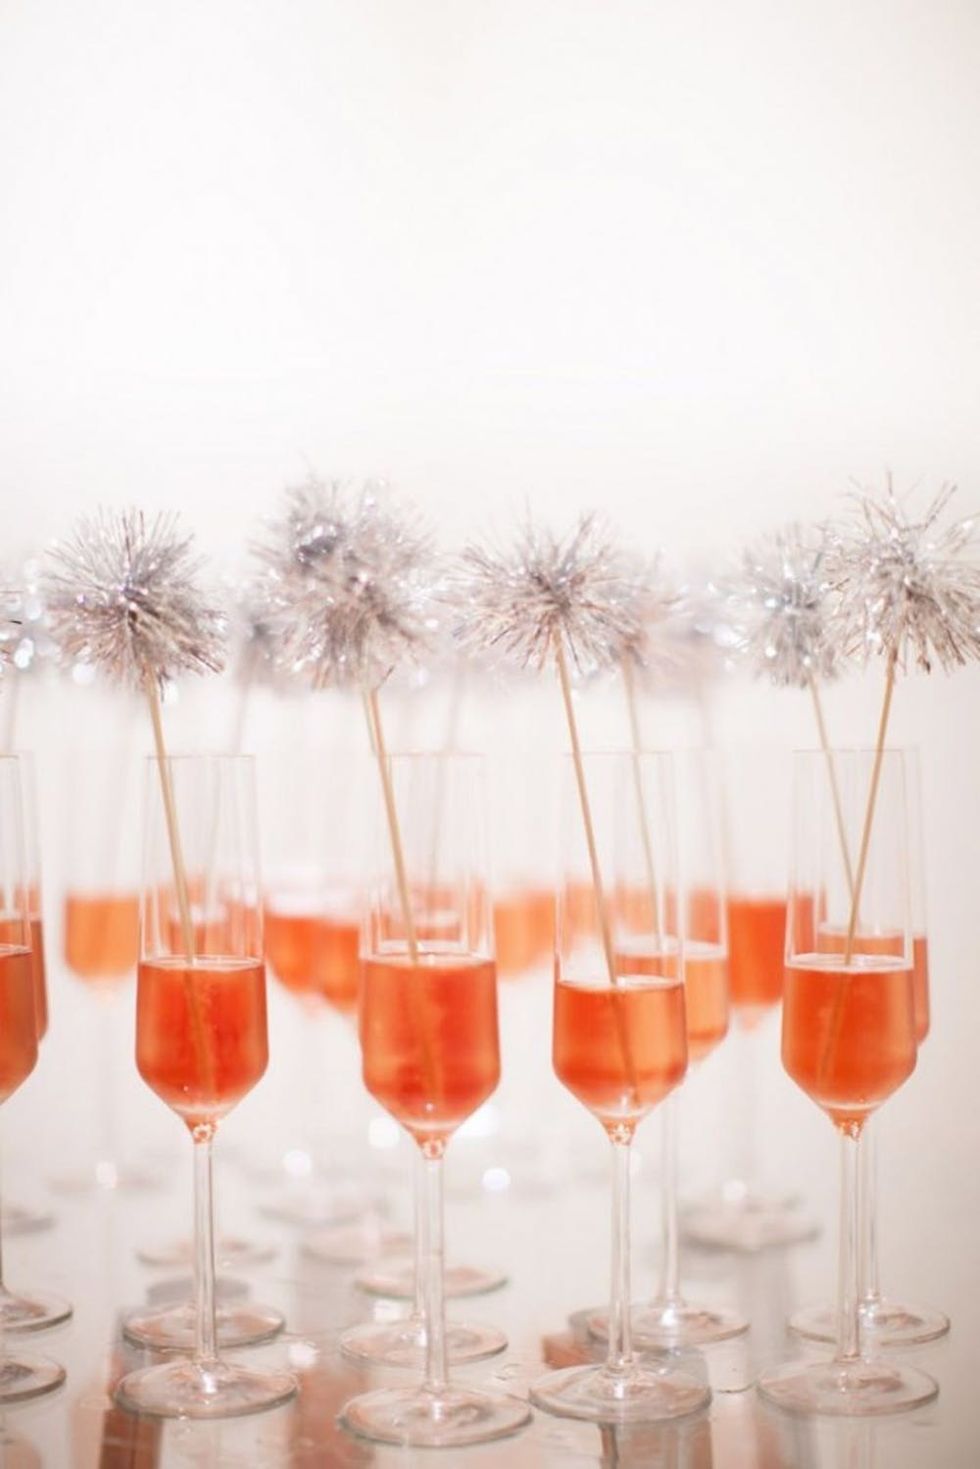 Sparkly Stirrers in a rose orange cocktail glass